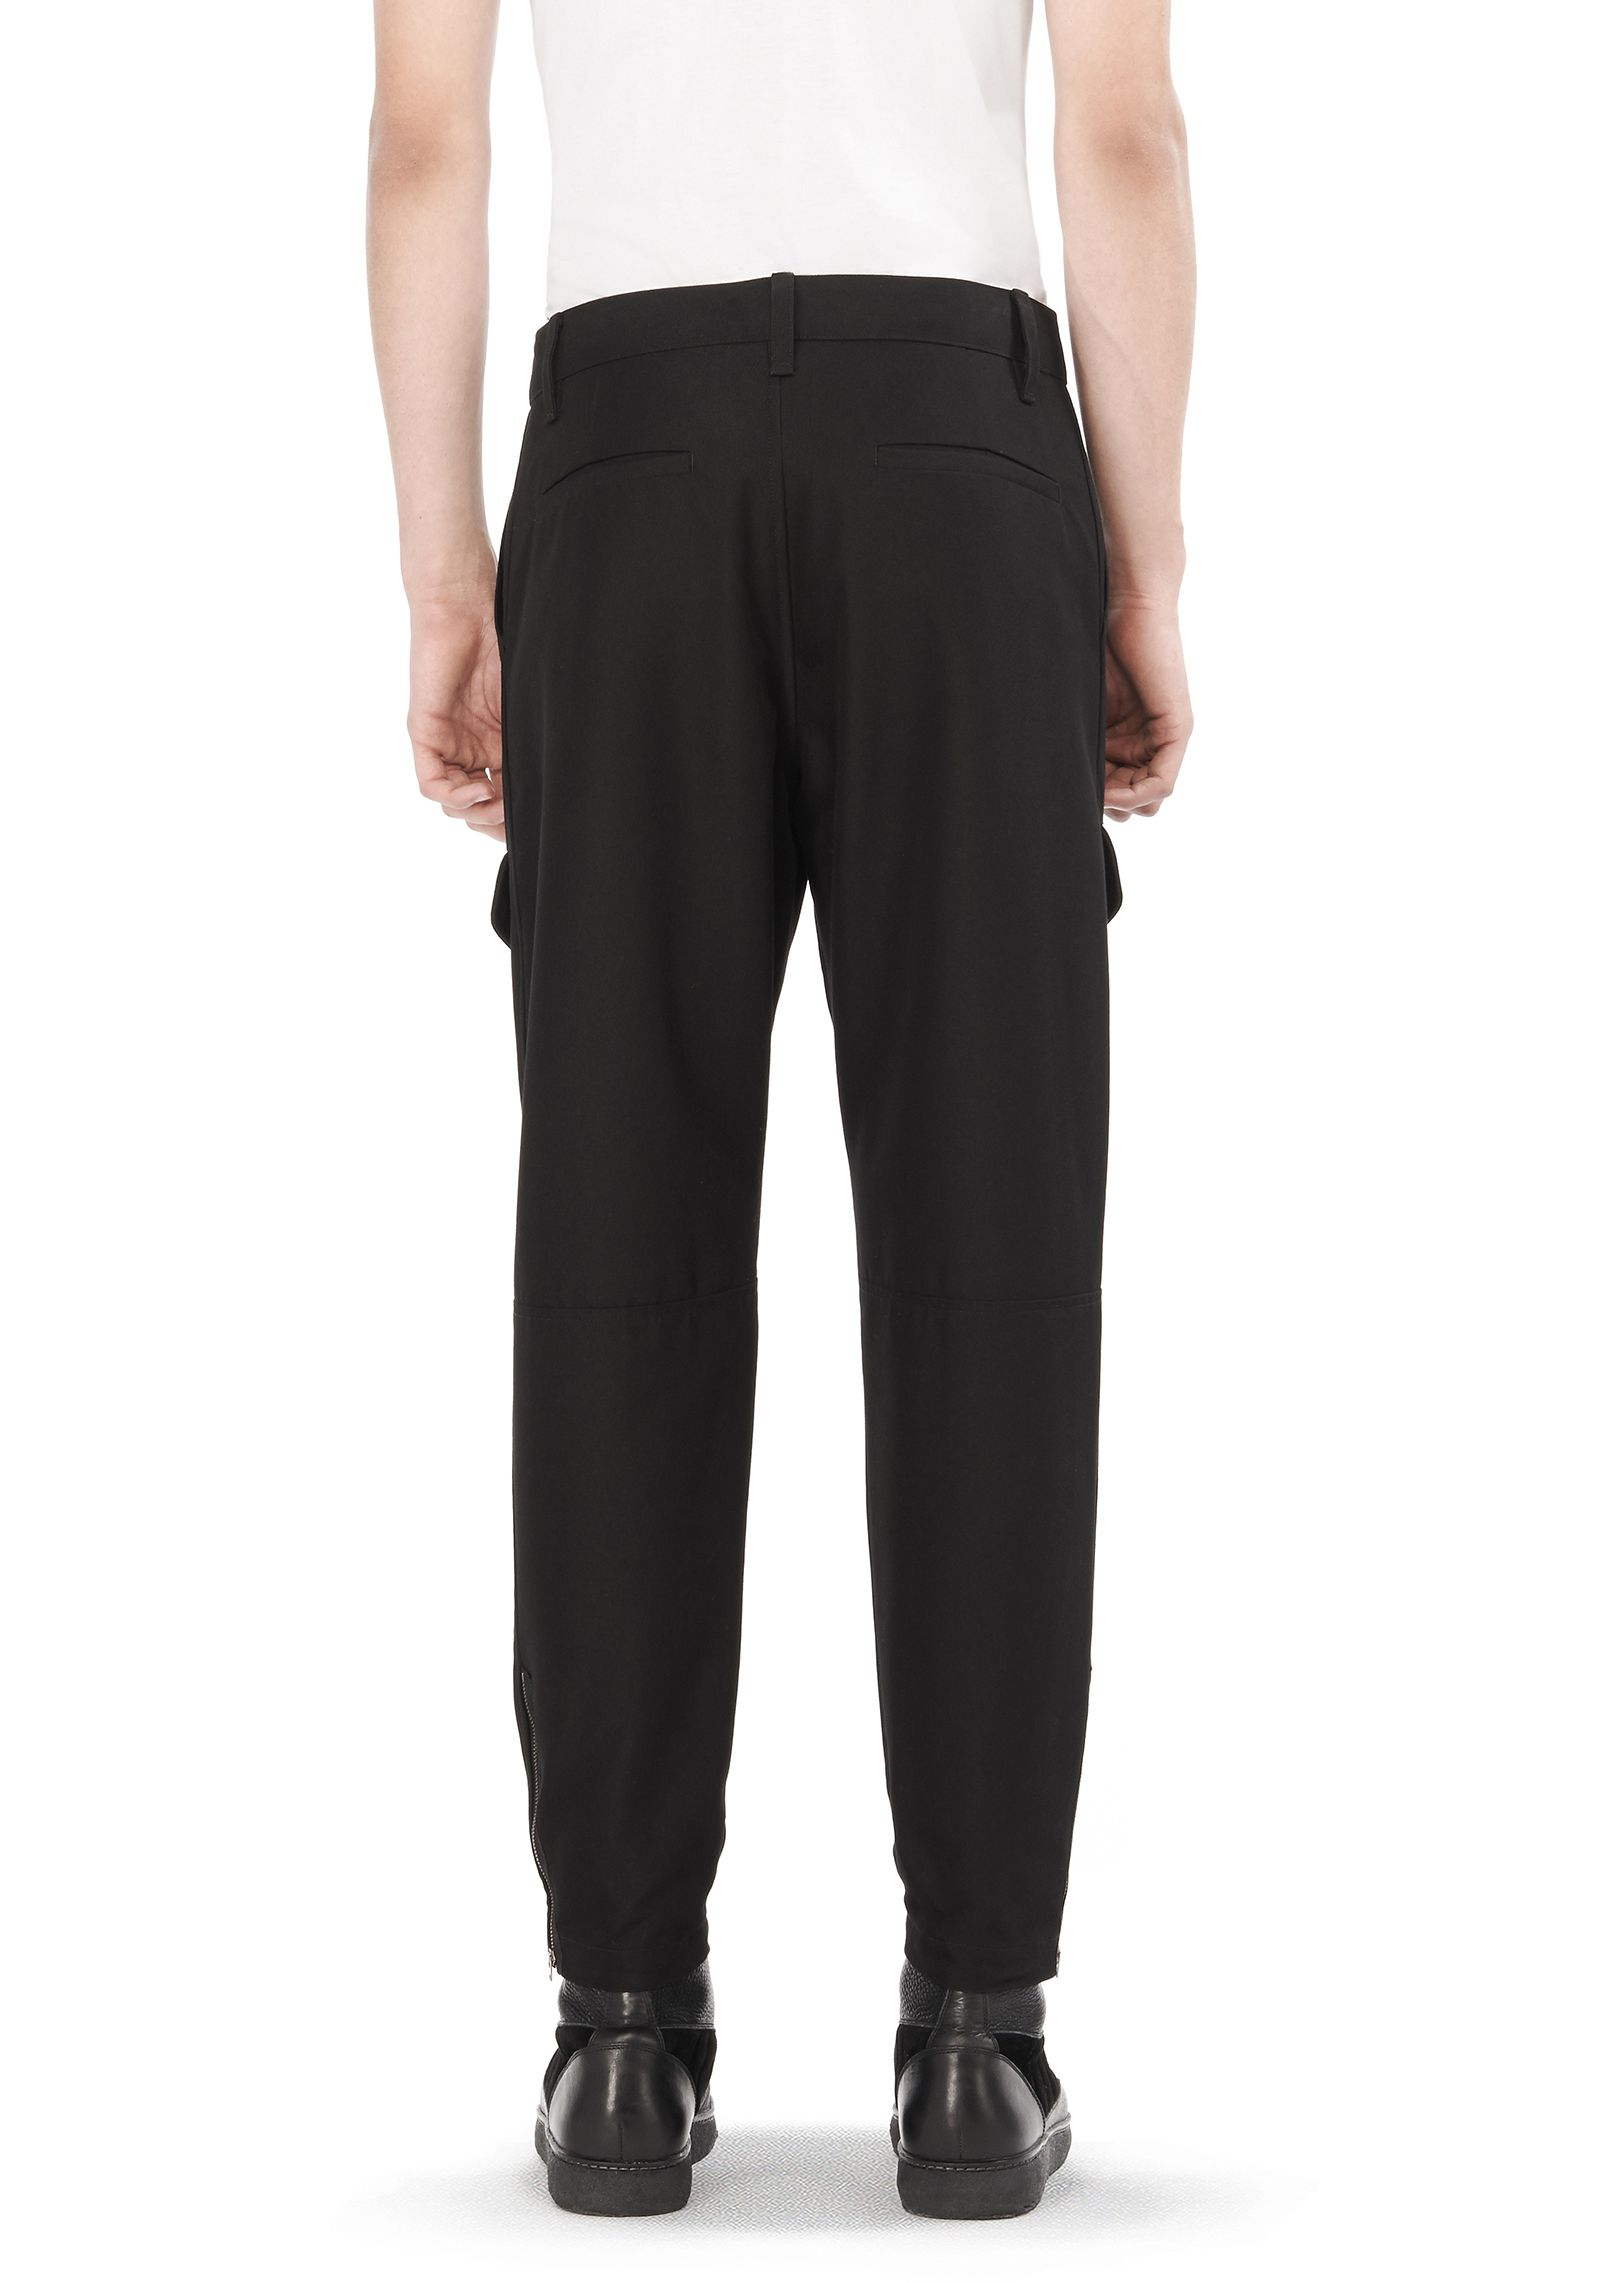 Alexander Wang Cotton Pegged Cargo Pants in Black for Men - Lyst